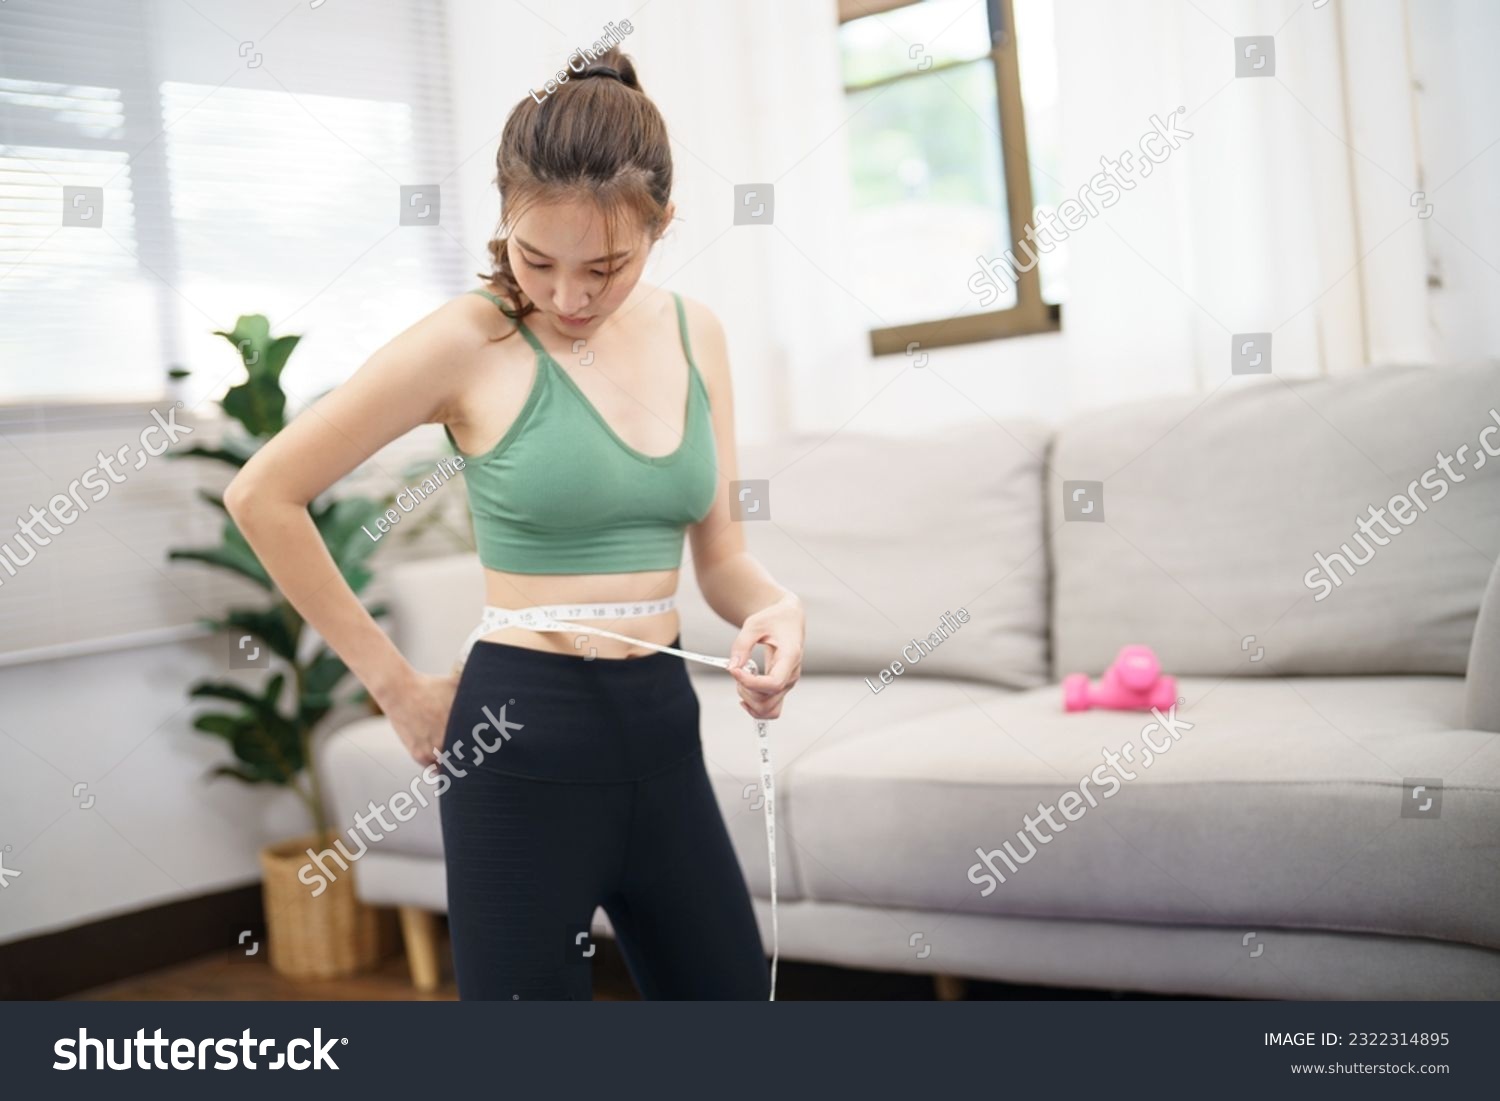 Asian woman with anorexia  with measuring tape feeling unhappy. Anorexia problem body perception and dysmorphia conceptใ #2322314895